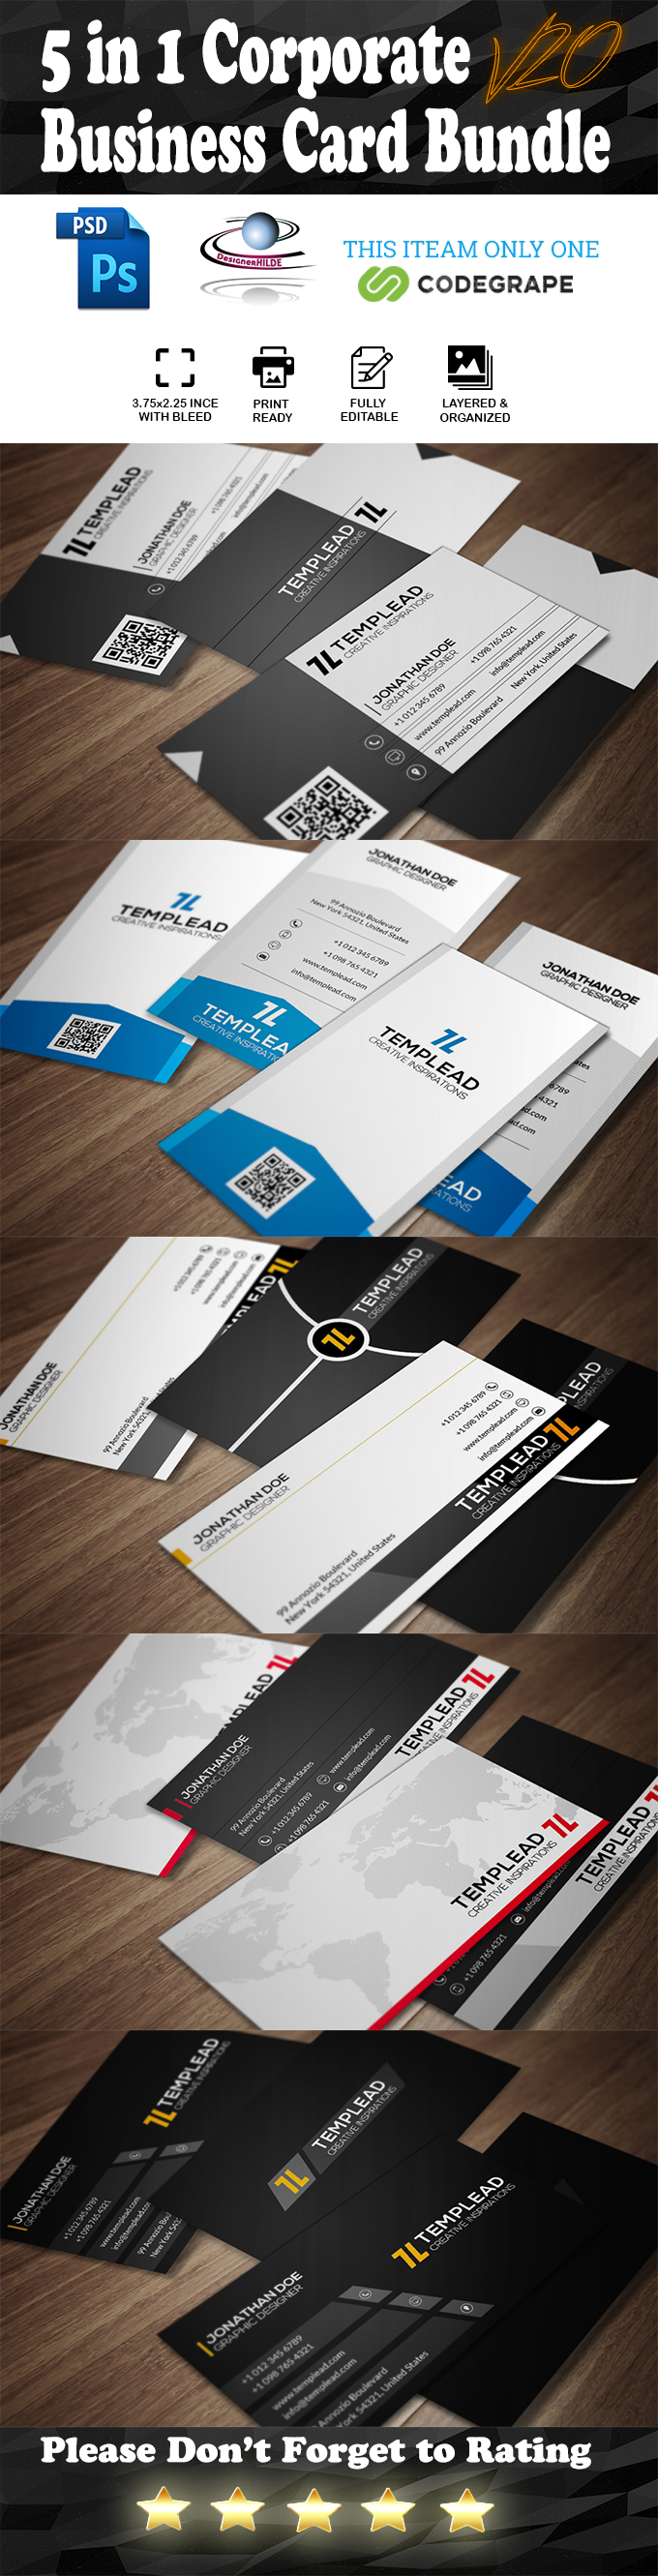 5 in 1 Corporate Business Card Bundle V. 20